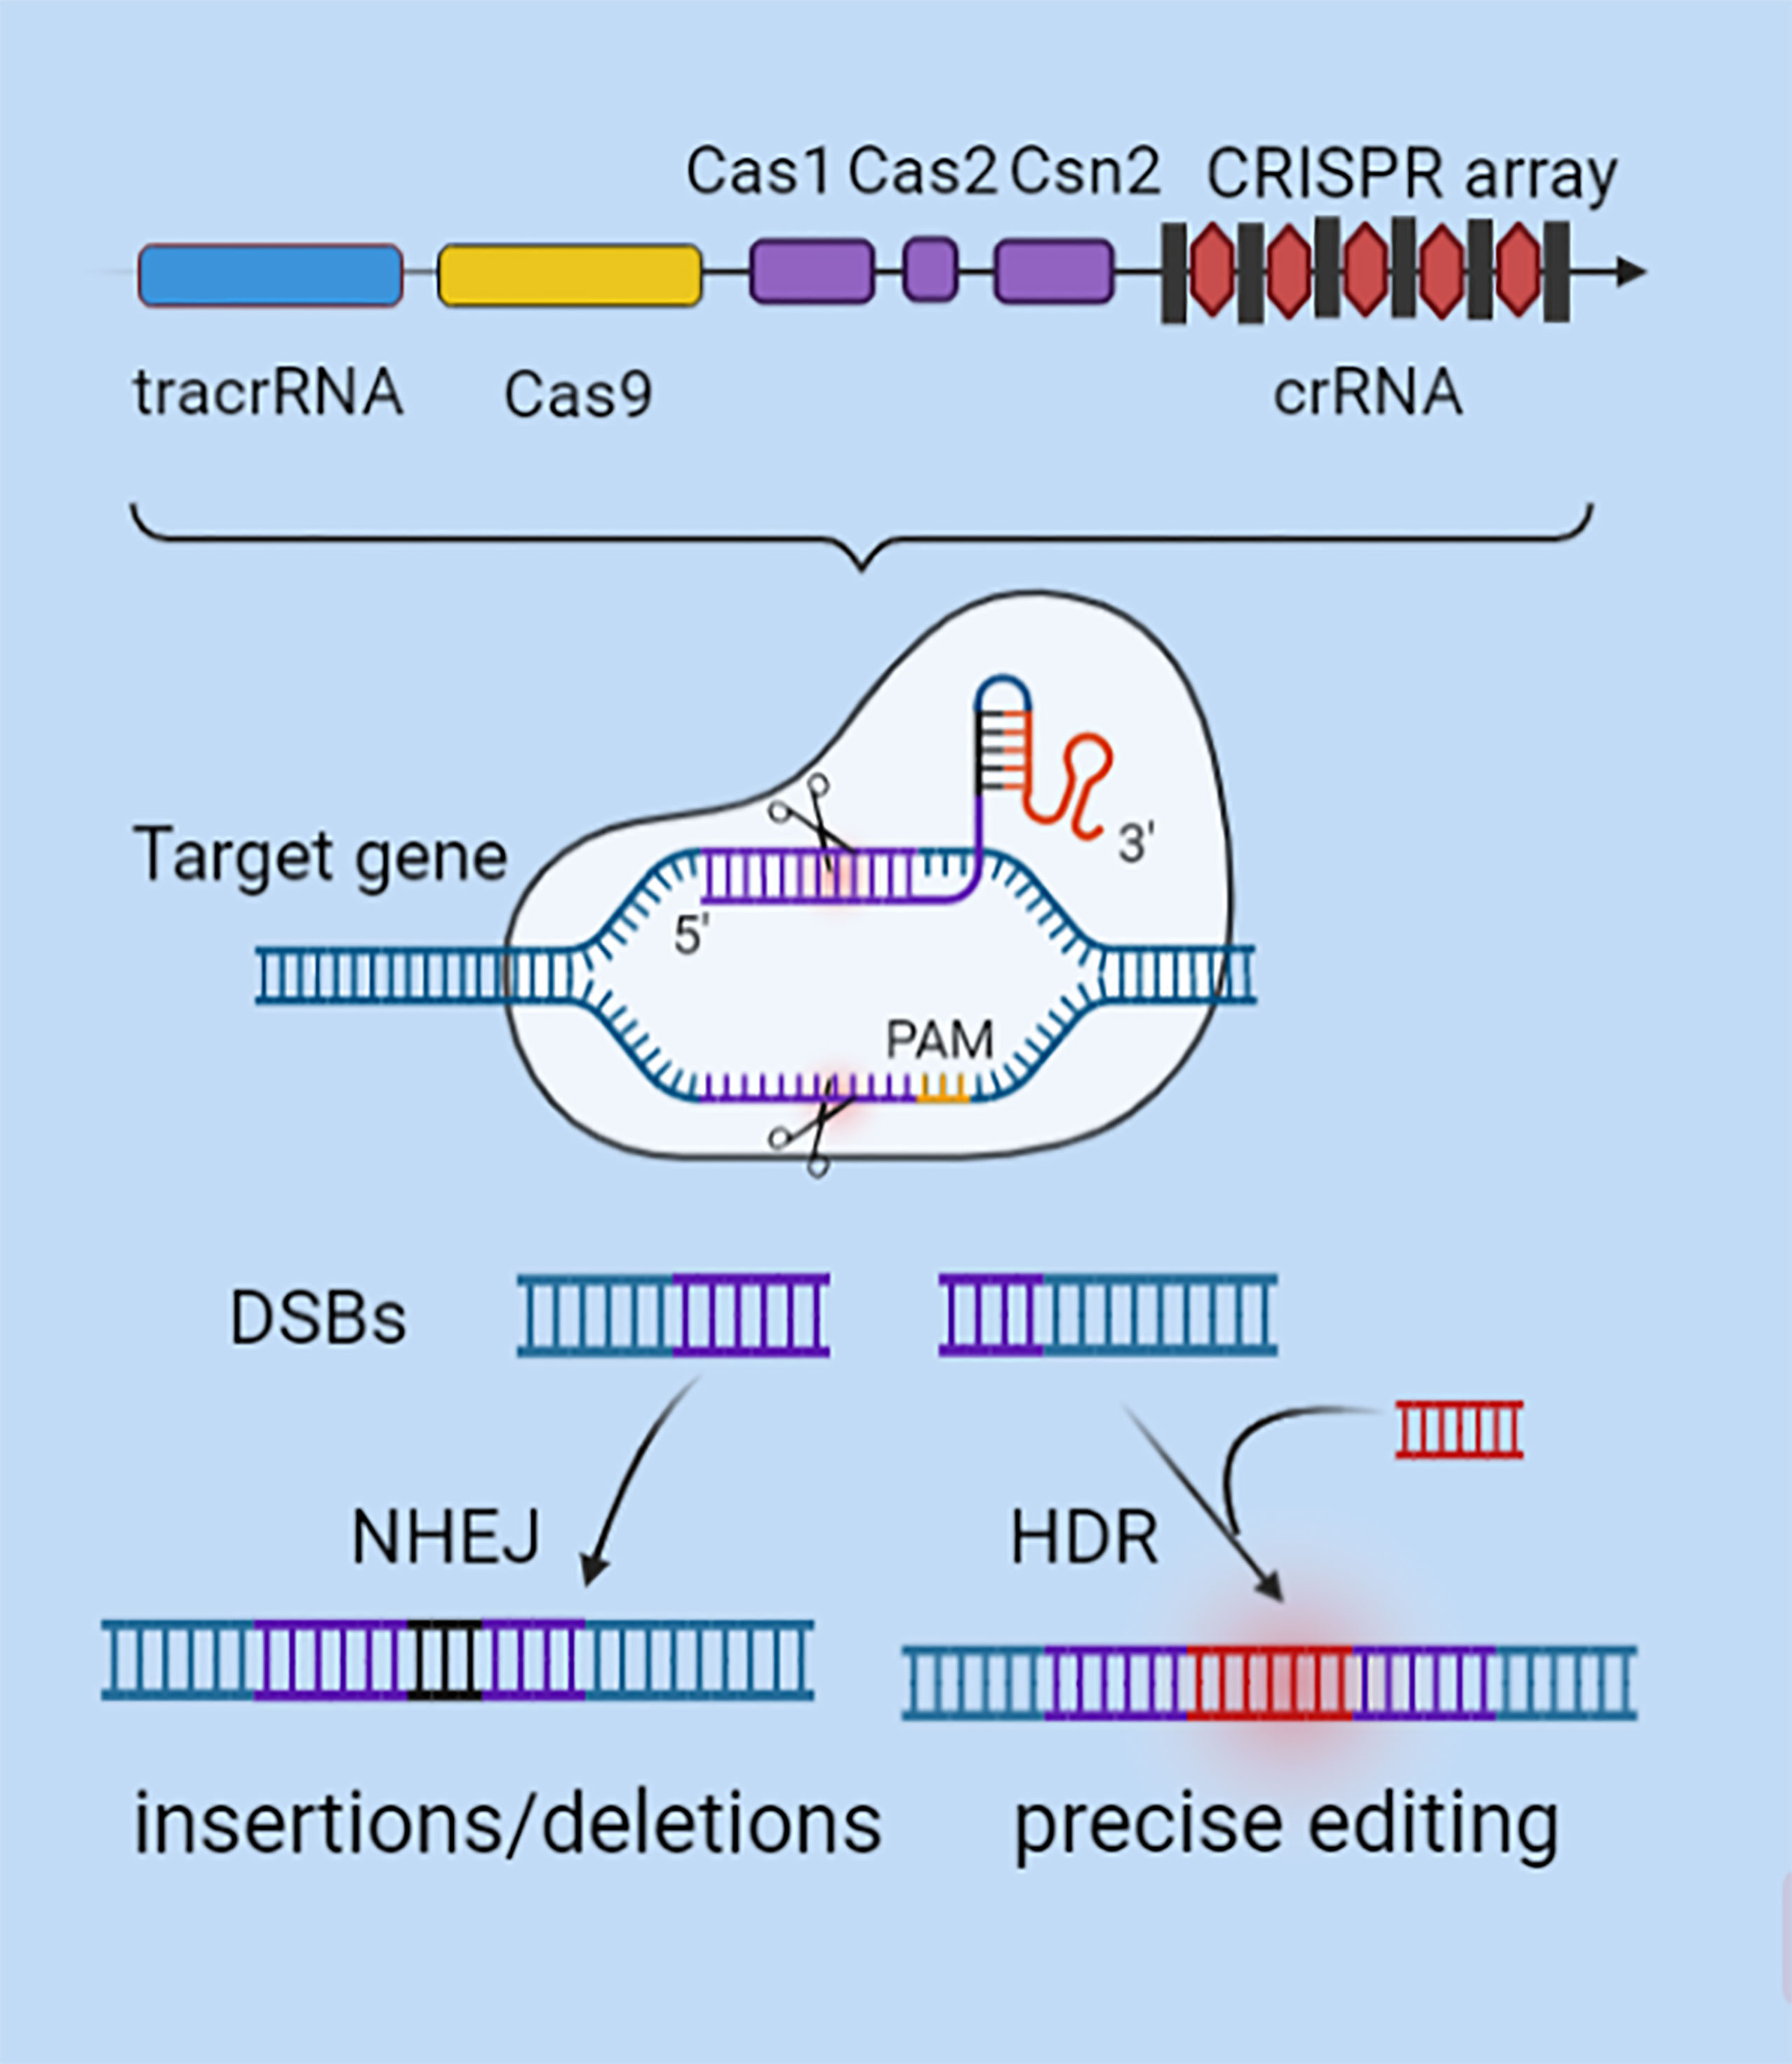 Frontiers | Effect of CRISPR/Cas9-Edited PD-1/PD-L1 on Tumor Immunity ...